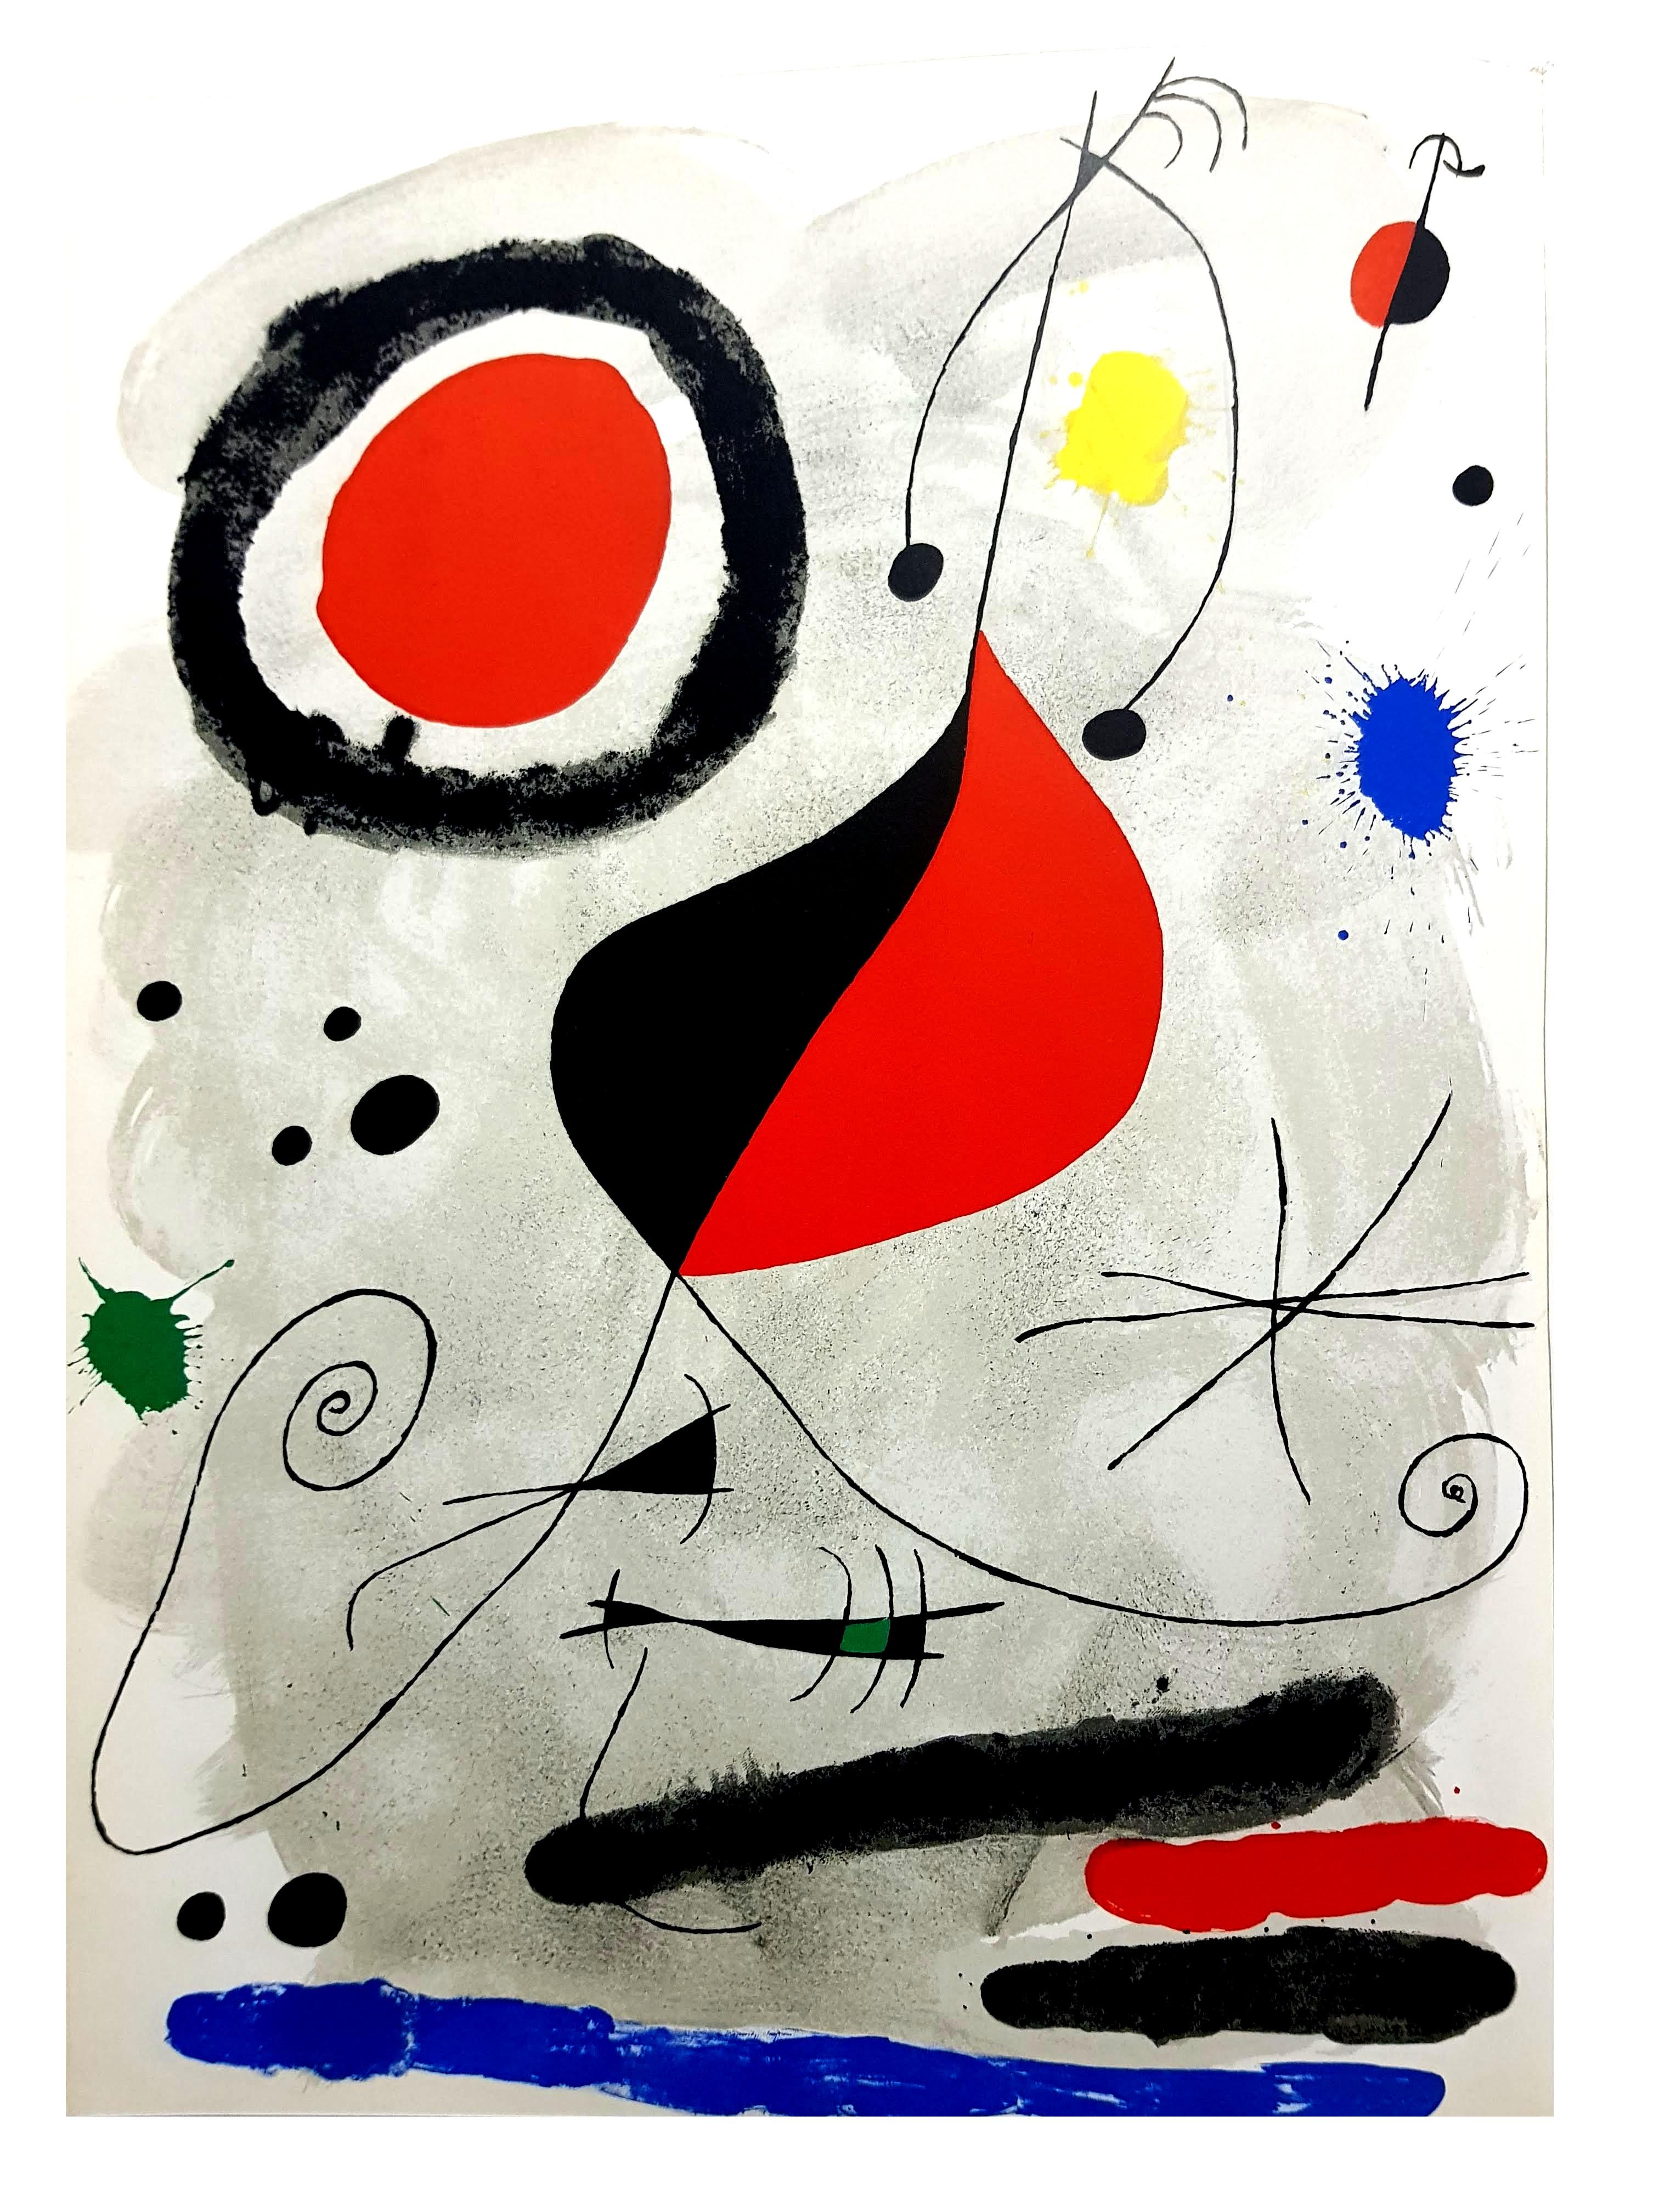 Miro -  Original Lithograph
1964
Dimensions: 38 x 28 cm
DLM No. 148, 1964 
Edition: Foundation Maeght at Saint Paul 
Edition size unknown
Unsigned, as issued

Biography

Joan Miró i Ferrà (April 20,1893 – December 25,1983) was a world renowned